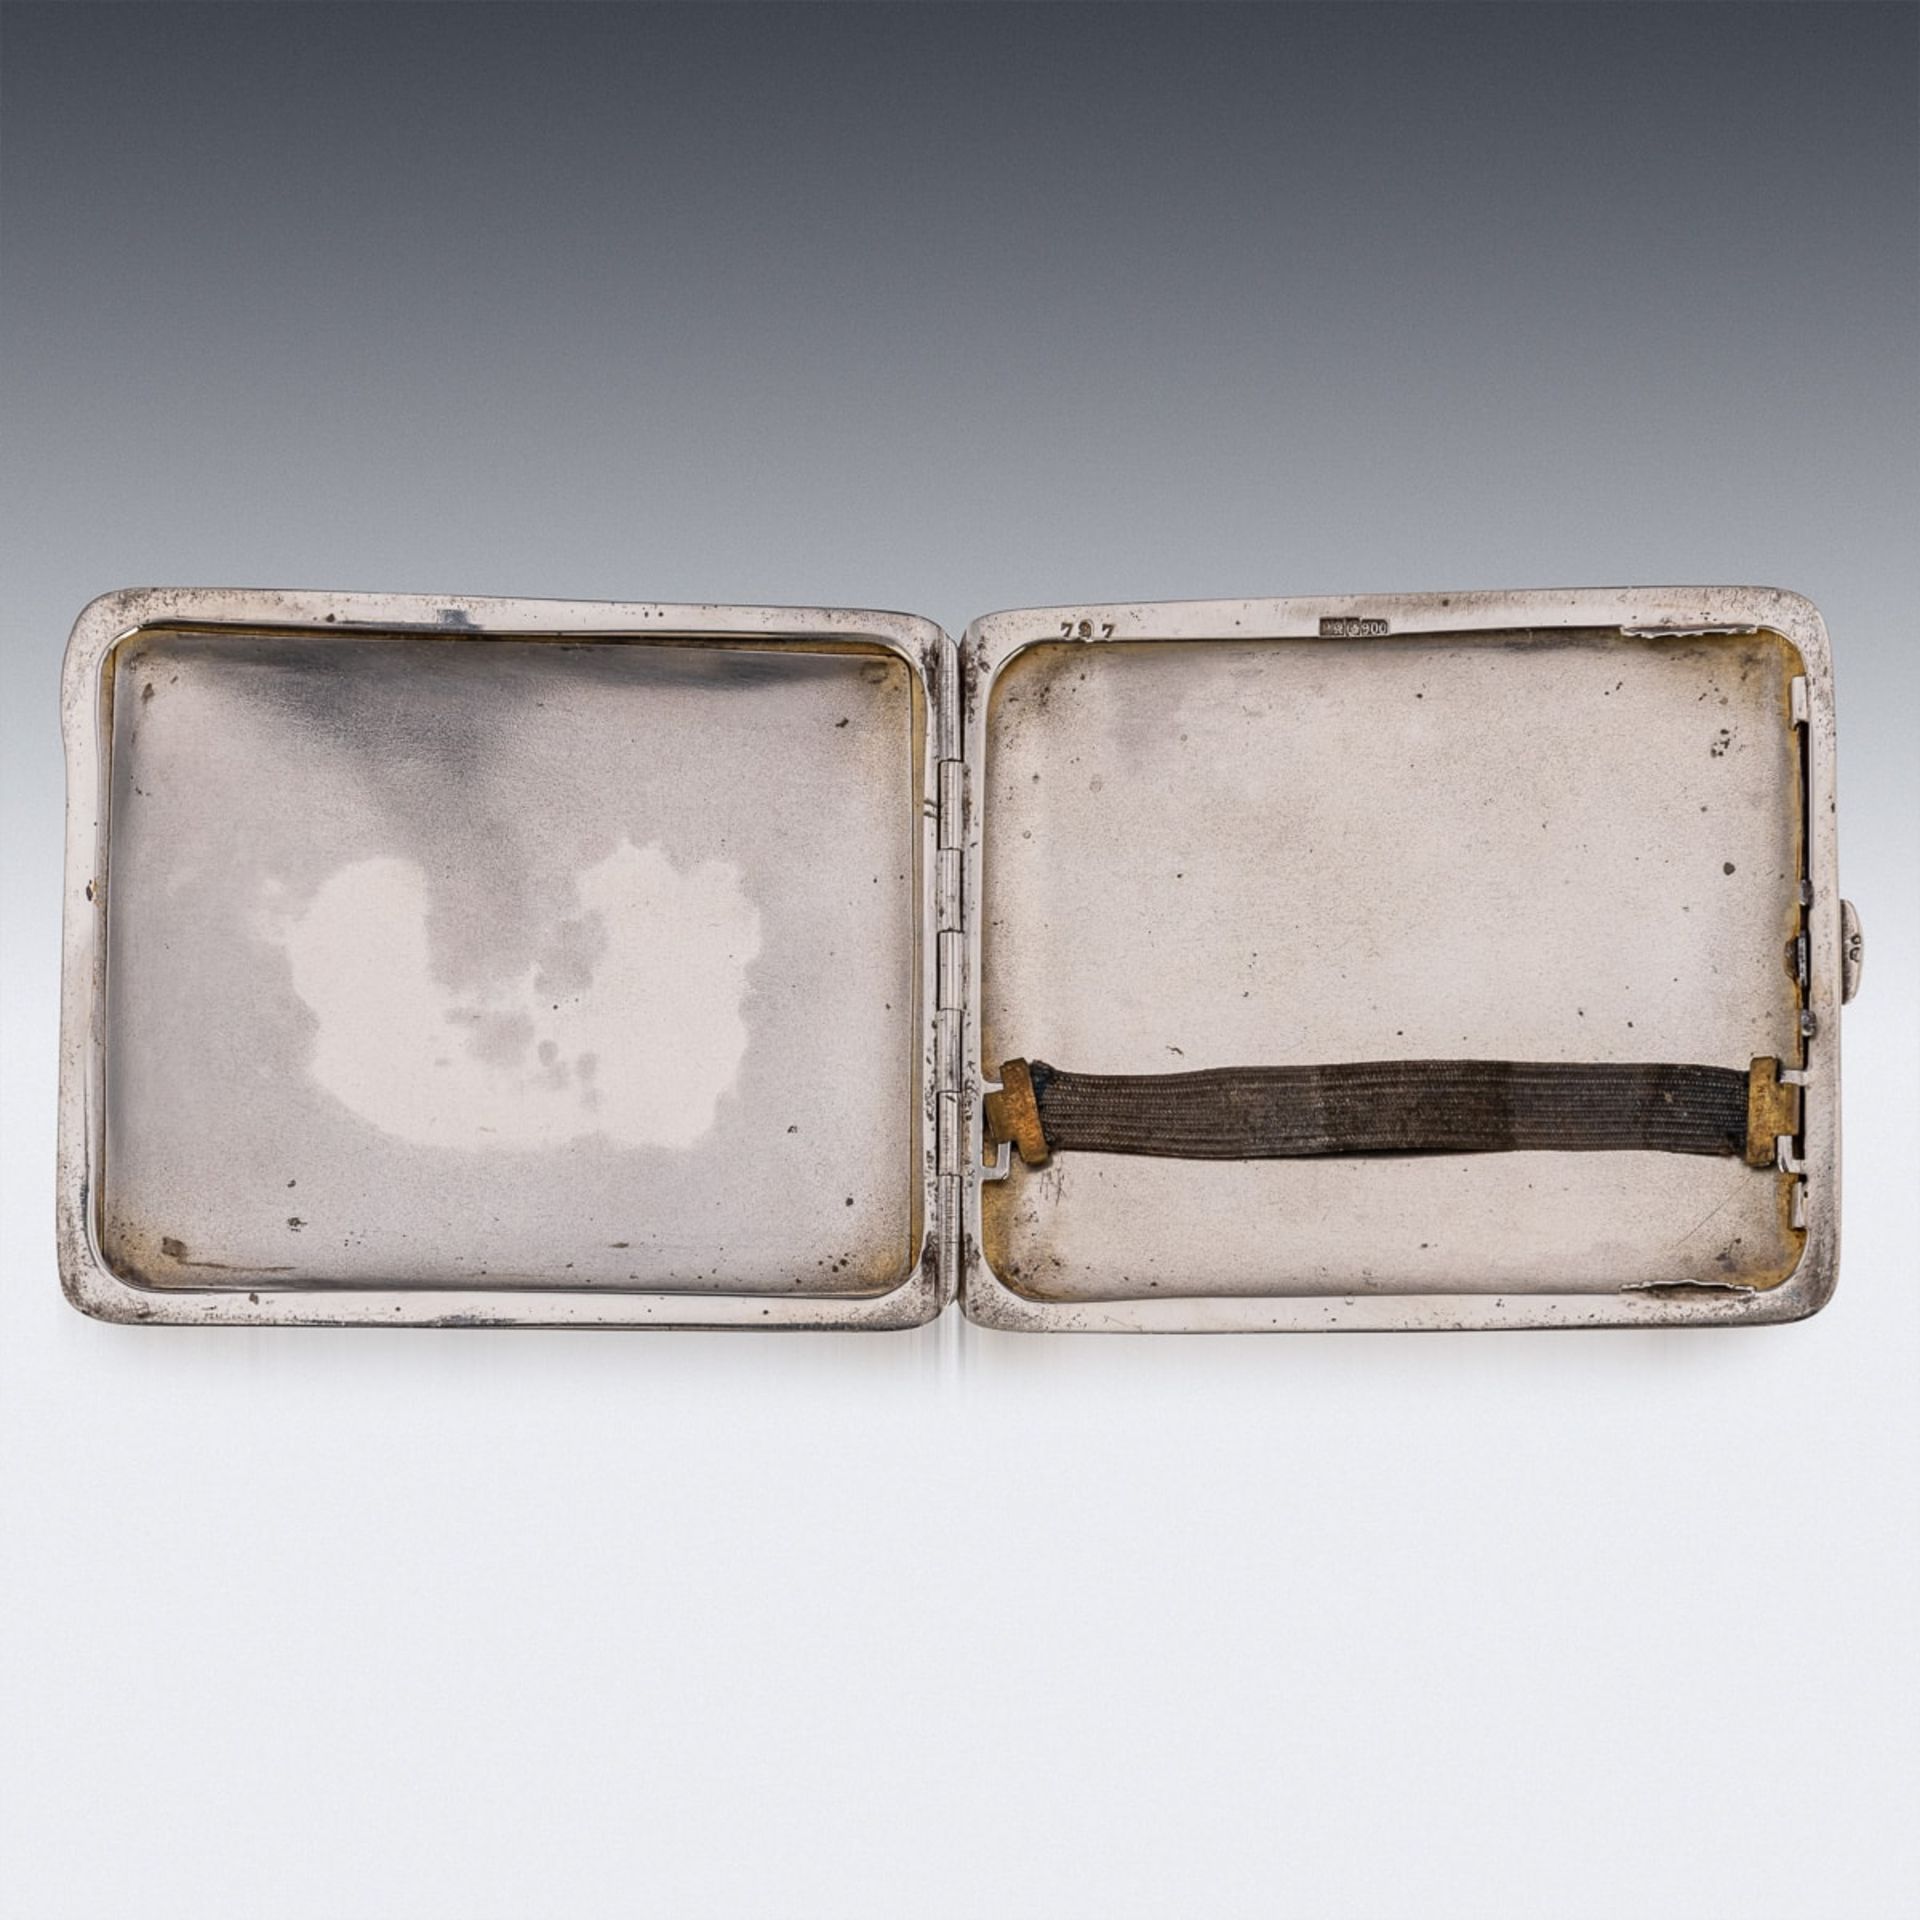 AN EARLY 20TH CENTURY EROTIC SILVER AND ENAMEL CIGARETTE CASE C. 1910 - Image 12 of 16